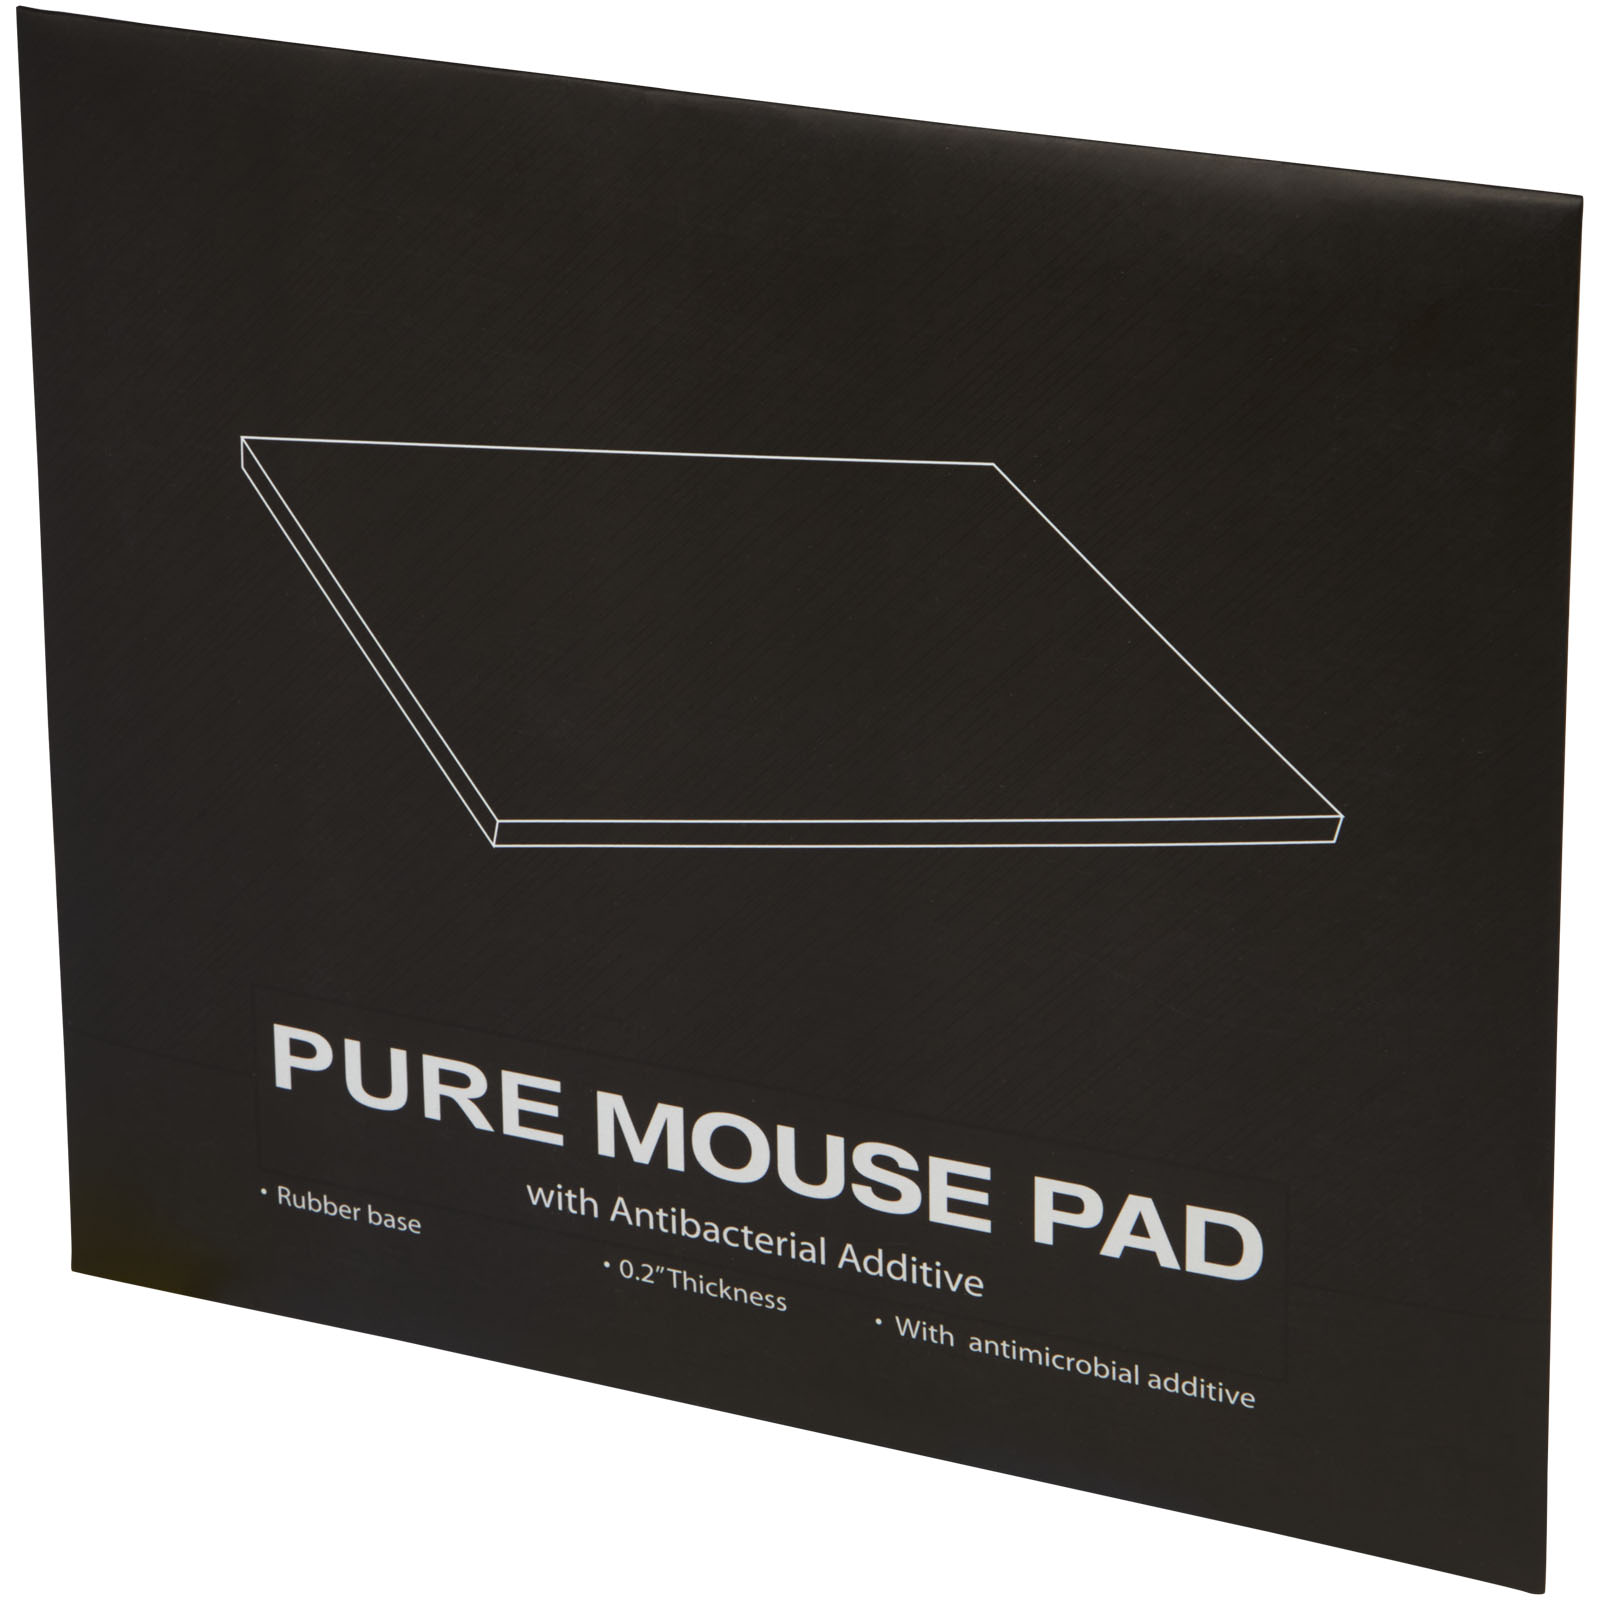 Advertising Computer Accessories - Pure mouse pad with antibacterial additive - 1